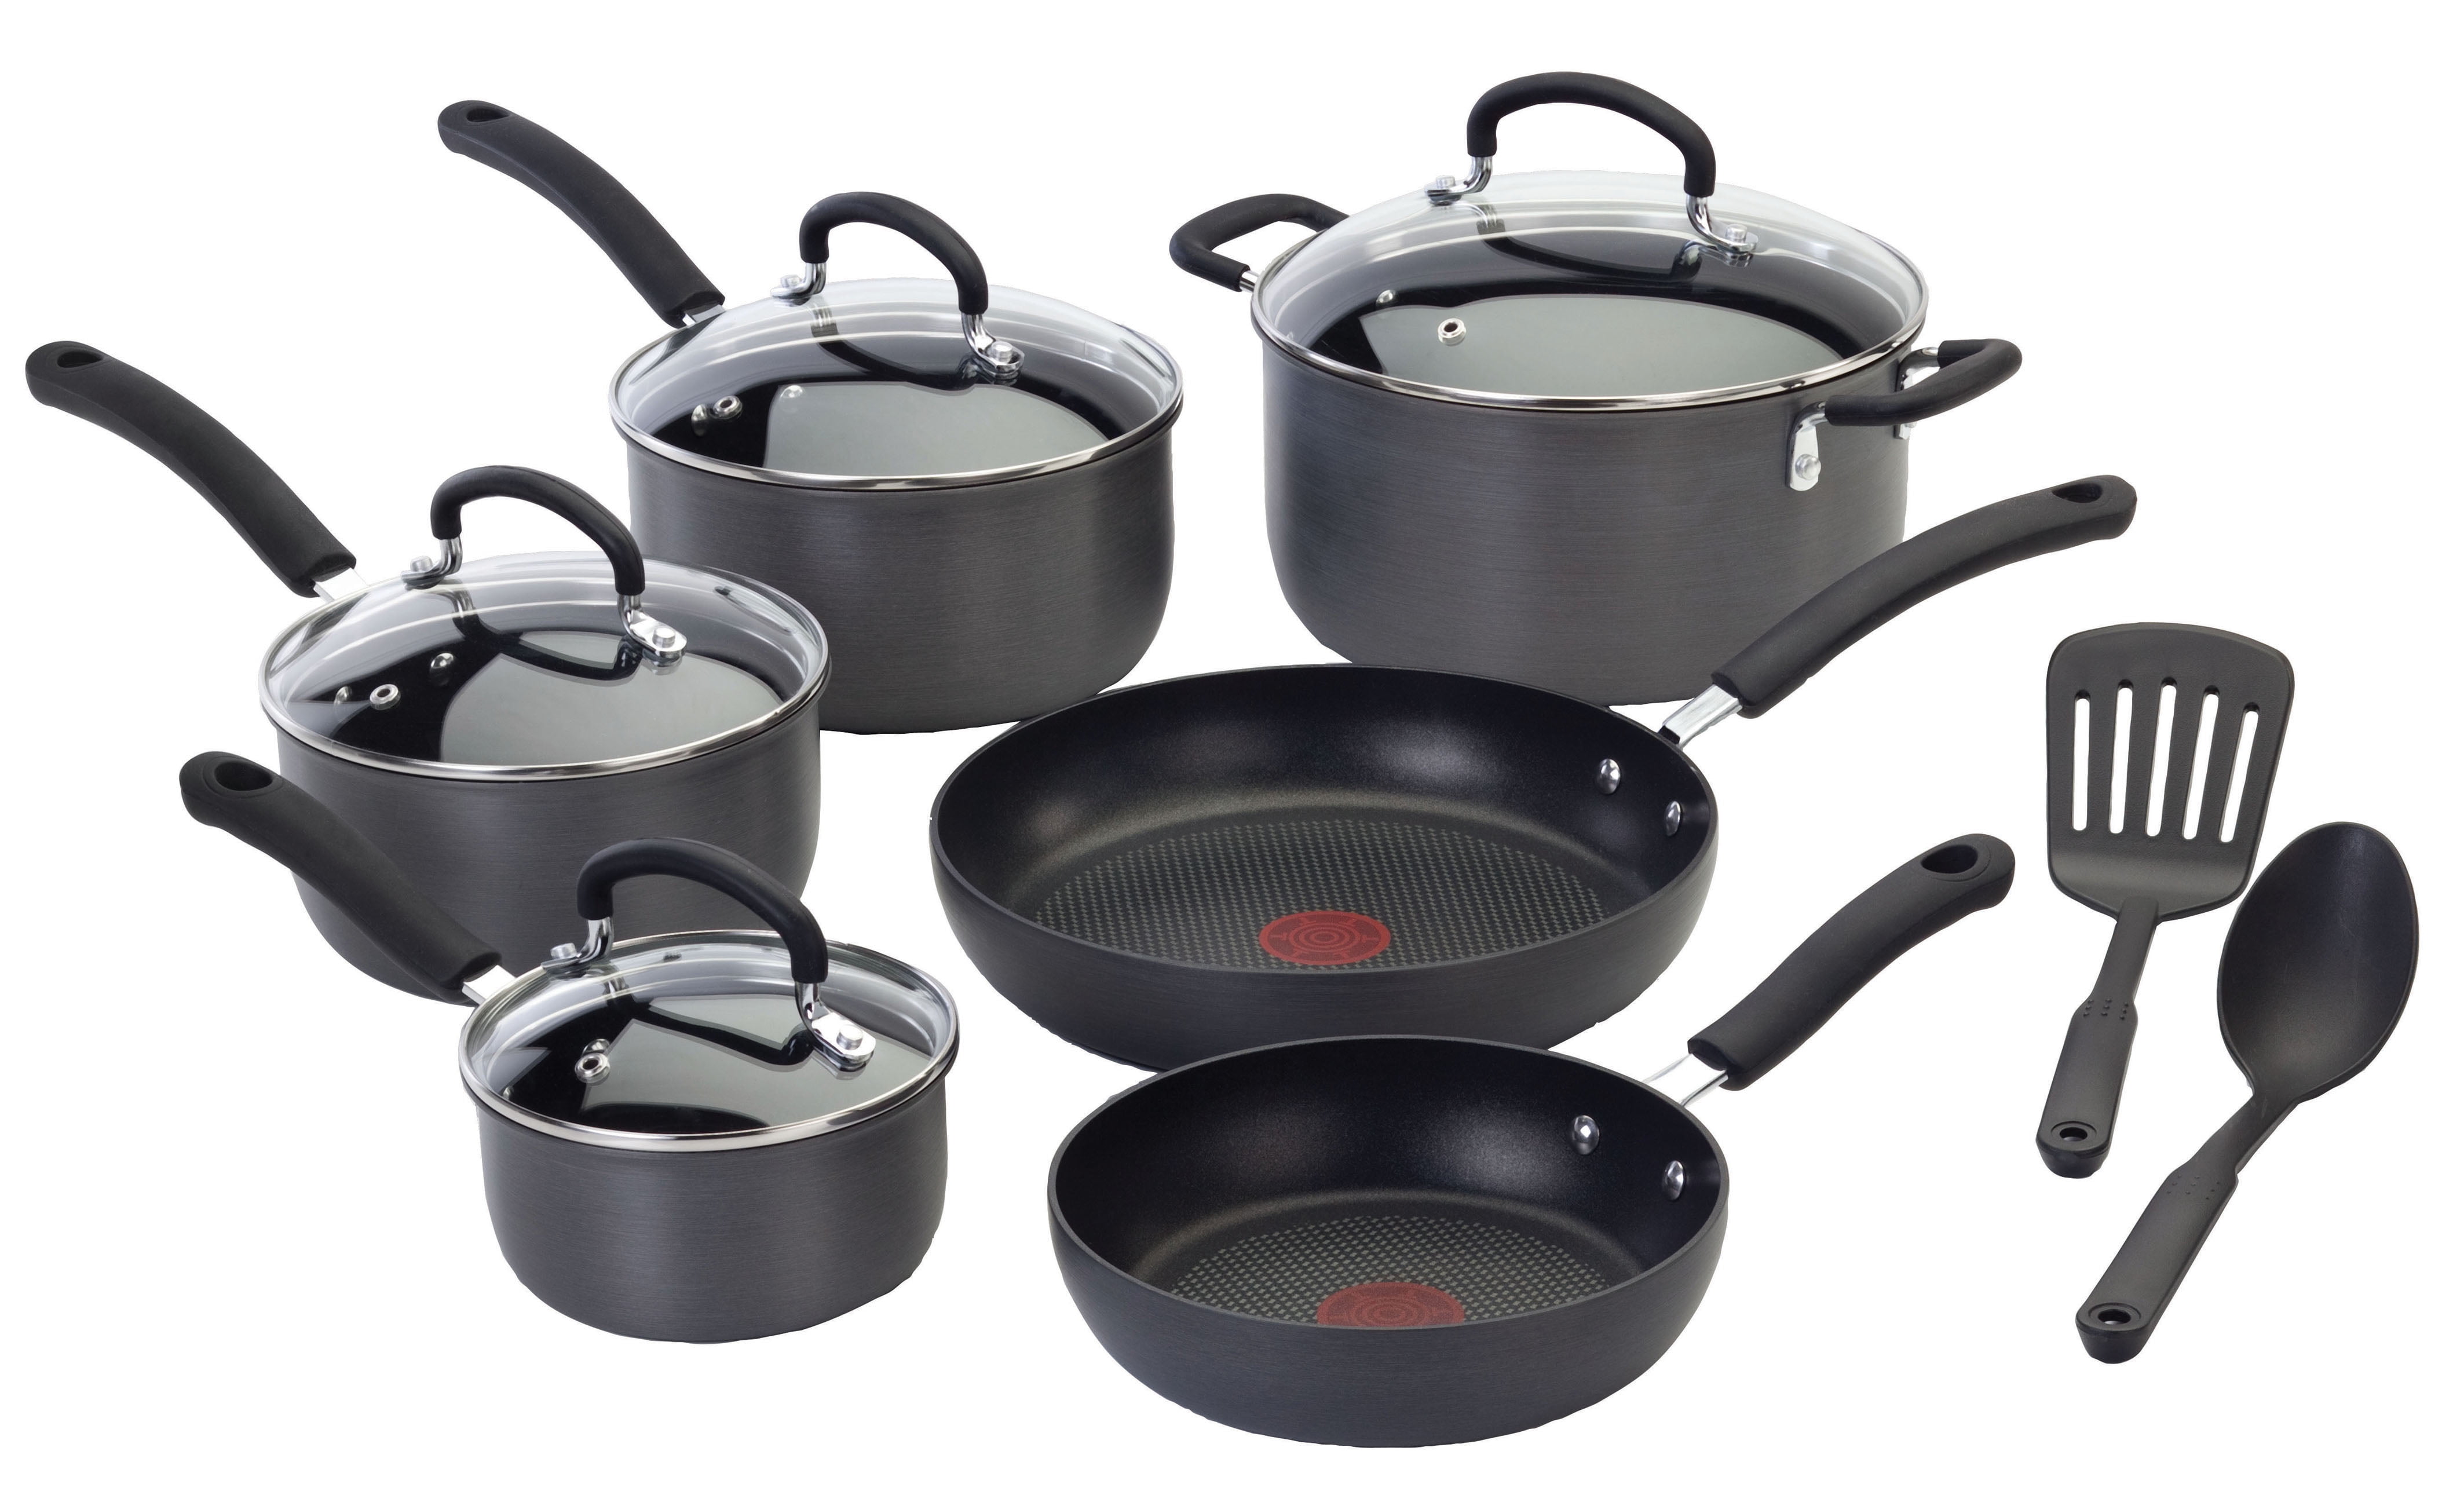 T-fal E765sc Ultimate Hard Anodized Cookware Set 12-piece Gray for sale online 